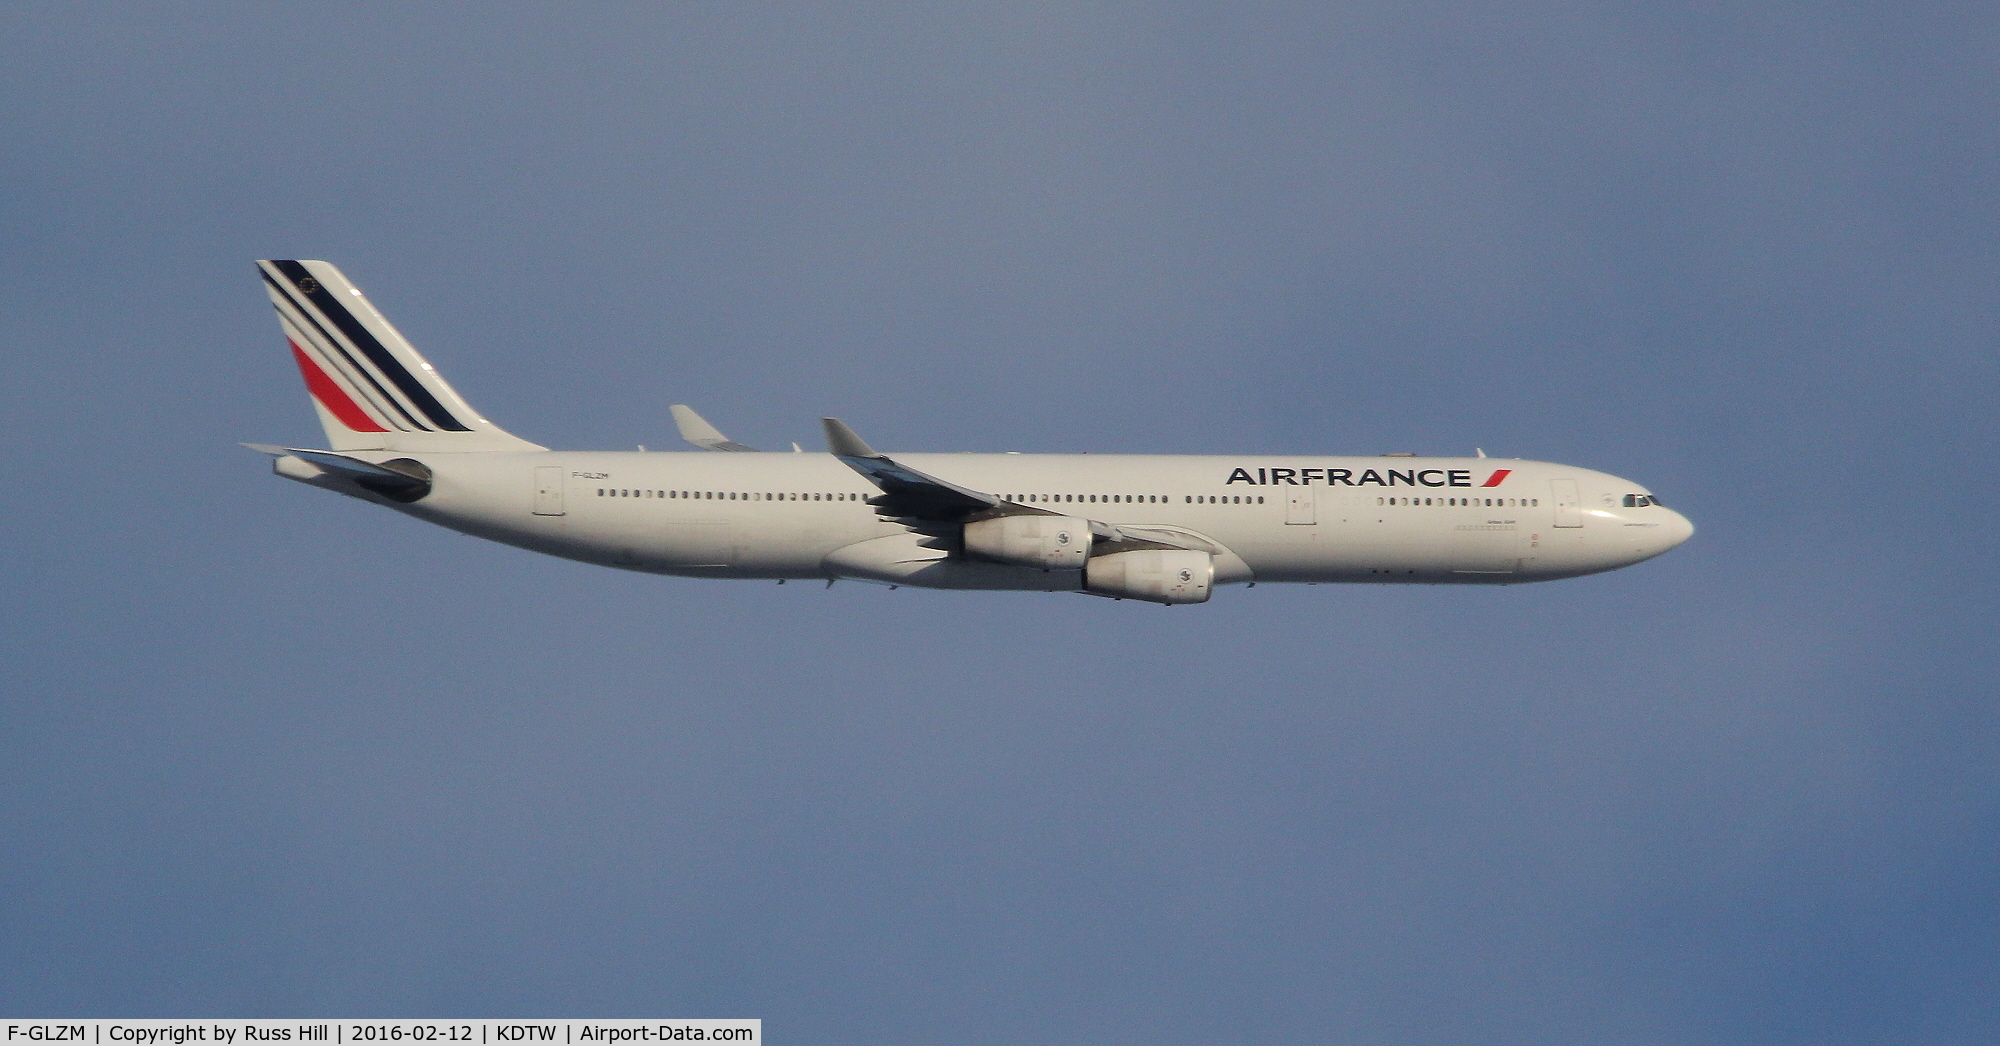 F-GLZM, 1998 Airbus A340-313X C/N 237, On approach to DTW, approx. 15 miles out.